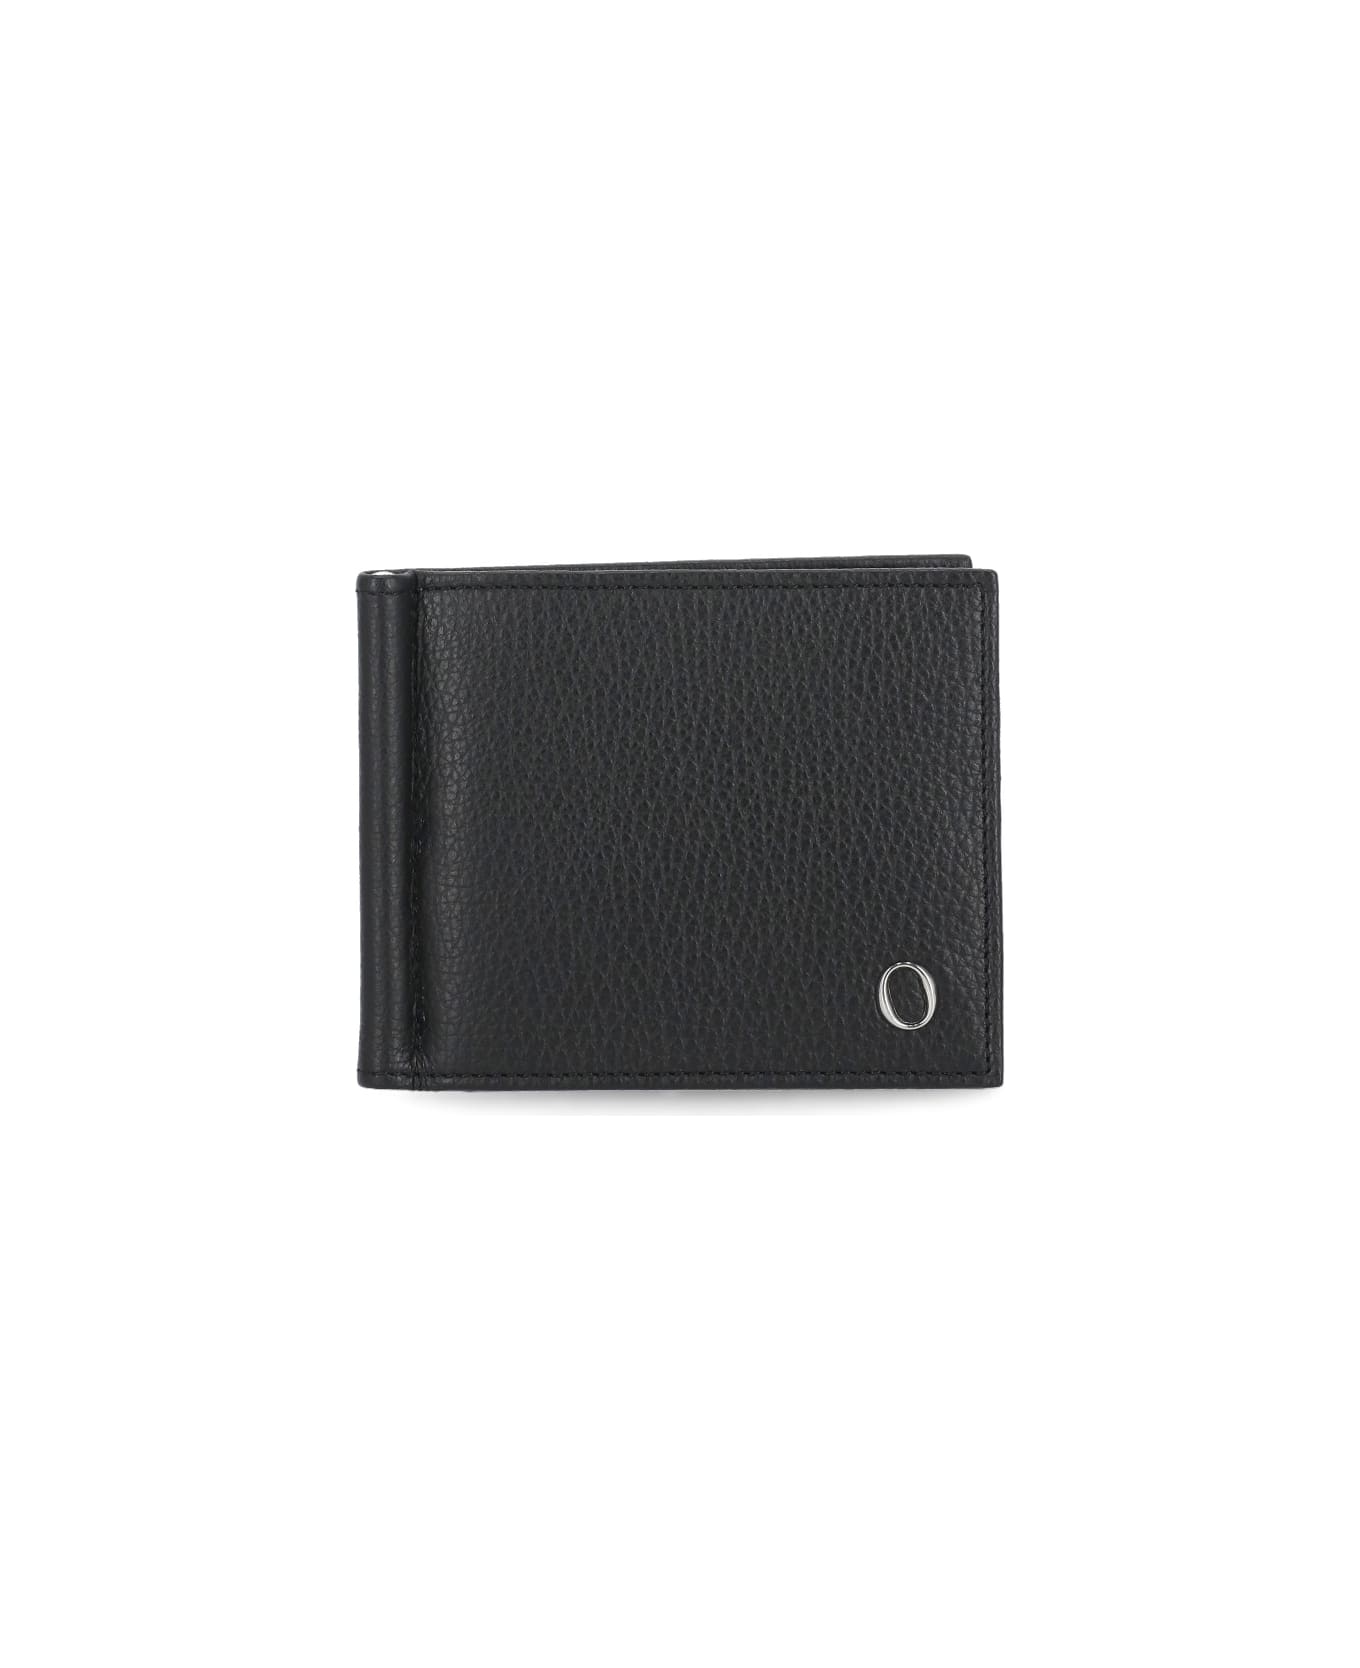 Orciani Micron Leather Wallet - Black